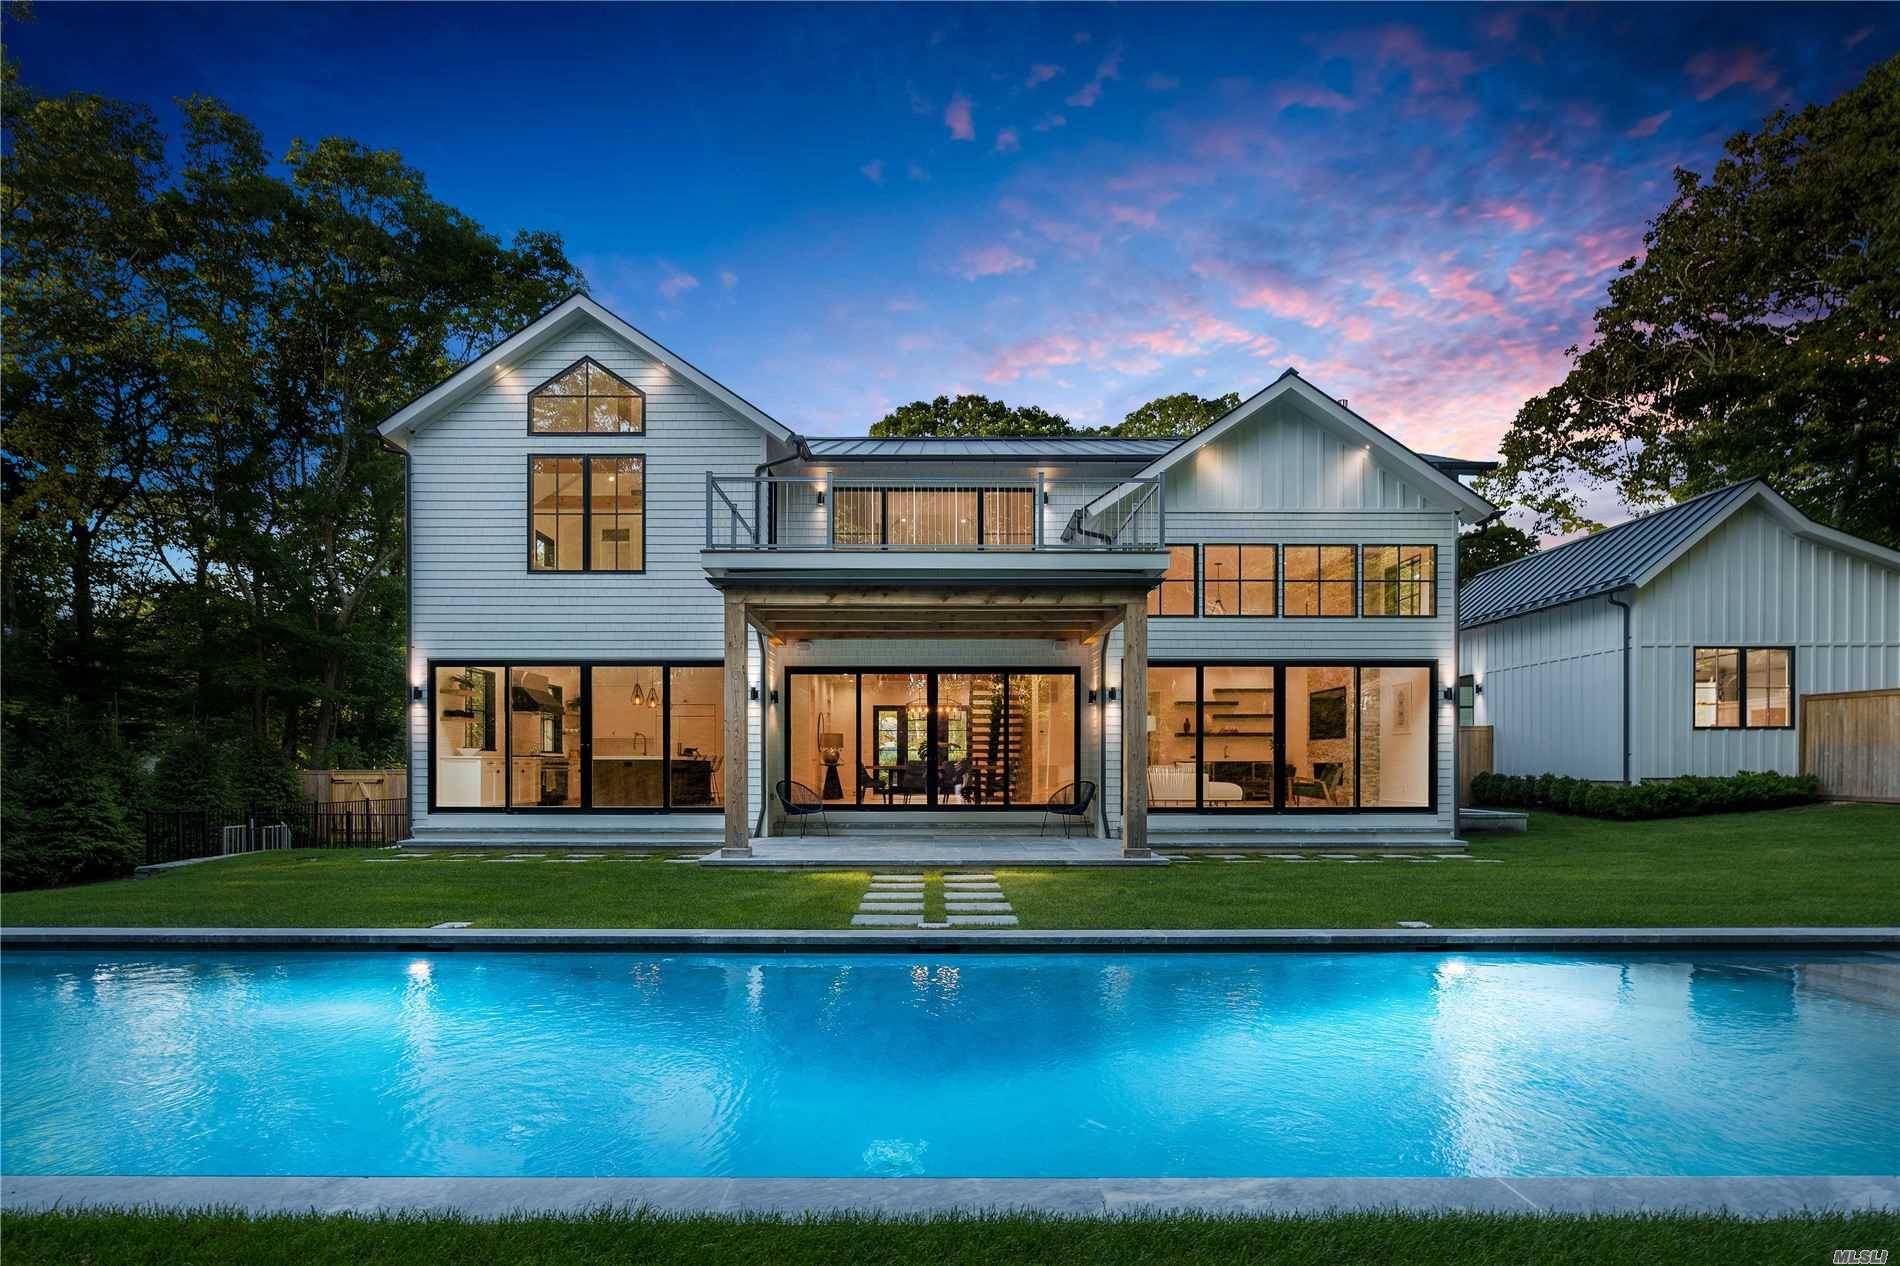 New construction on a prime half acre parcel is located on coveted Wireless Road in East Hampton, less than one mile from the East Hampton Village center and ocean beaches.